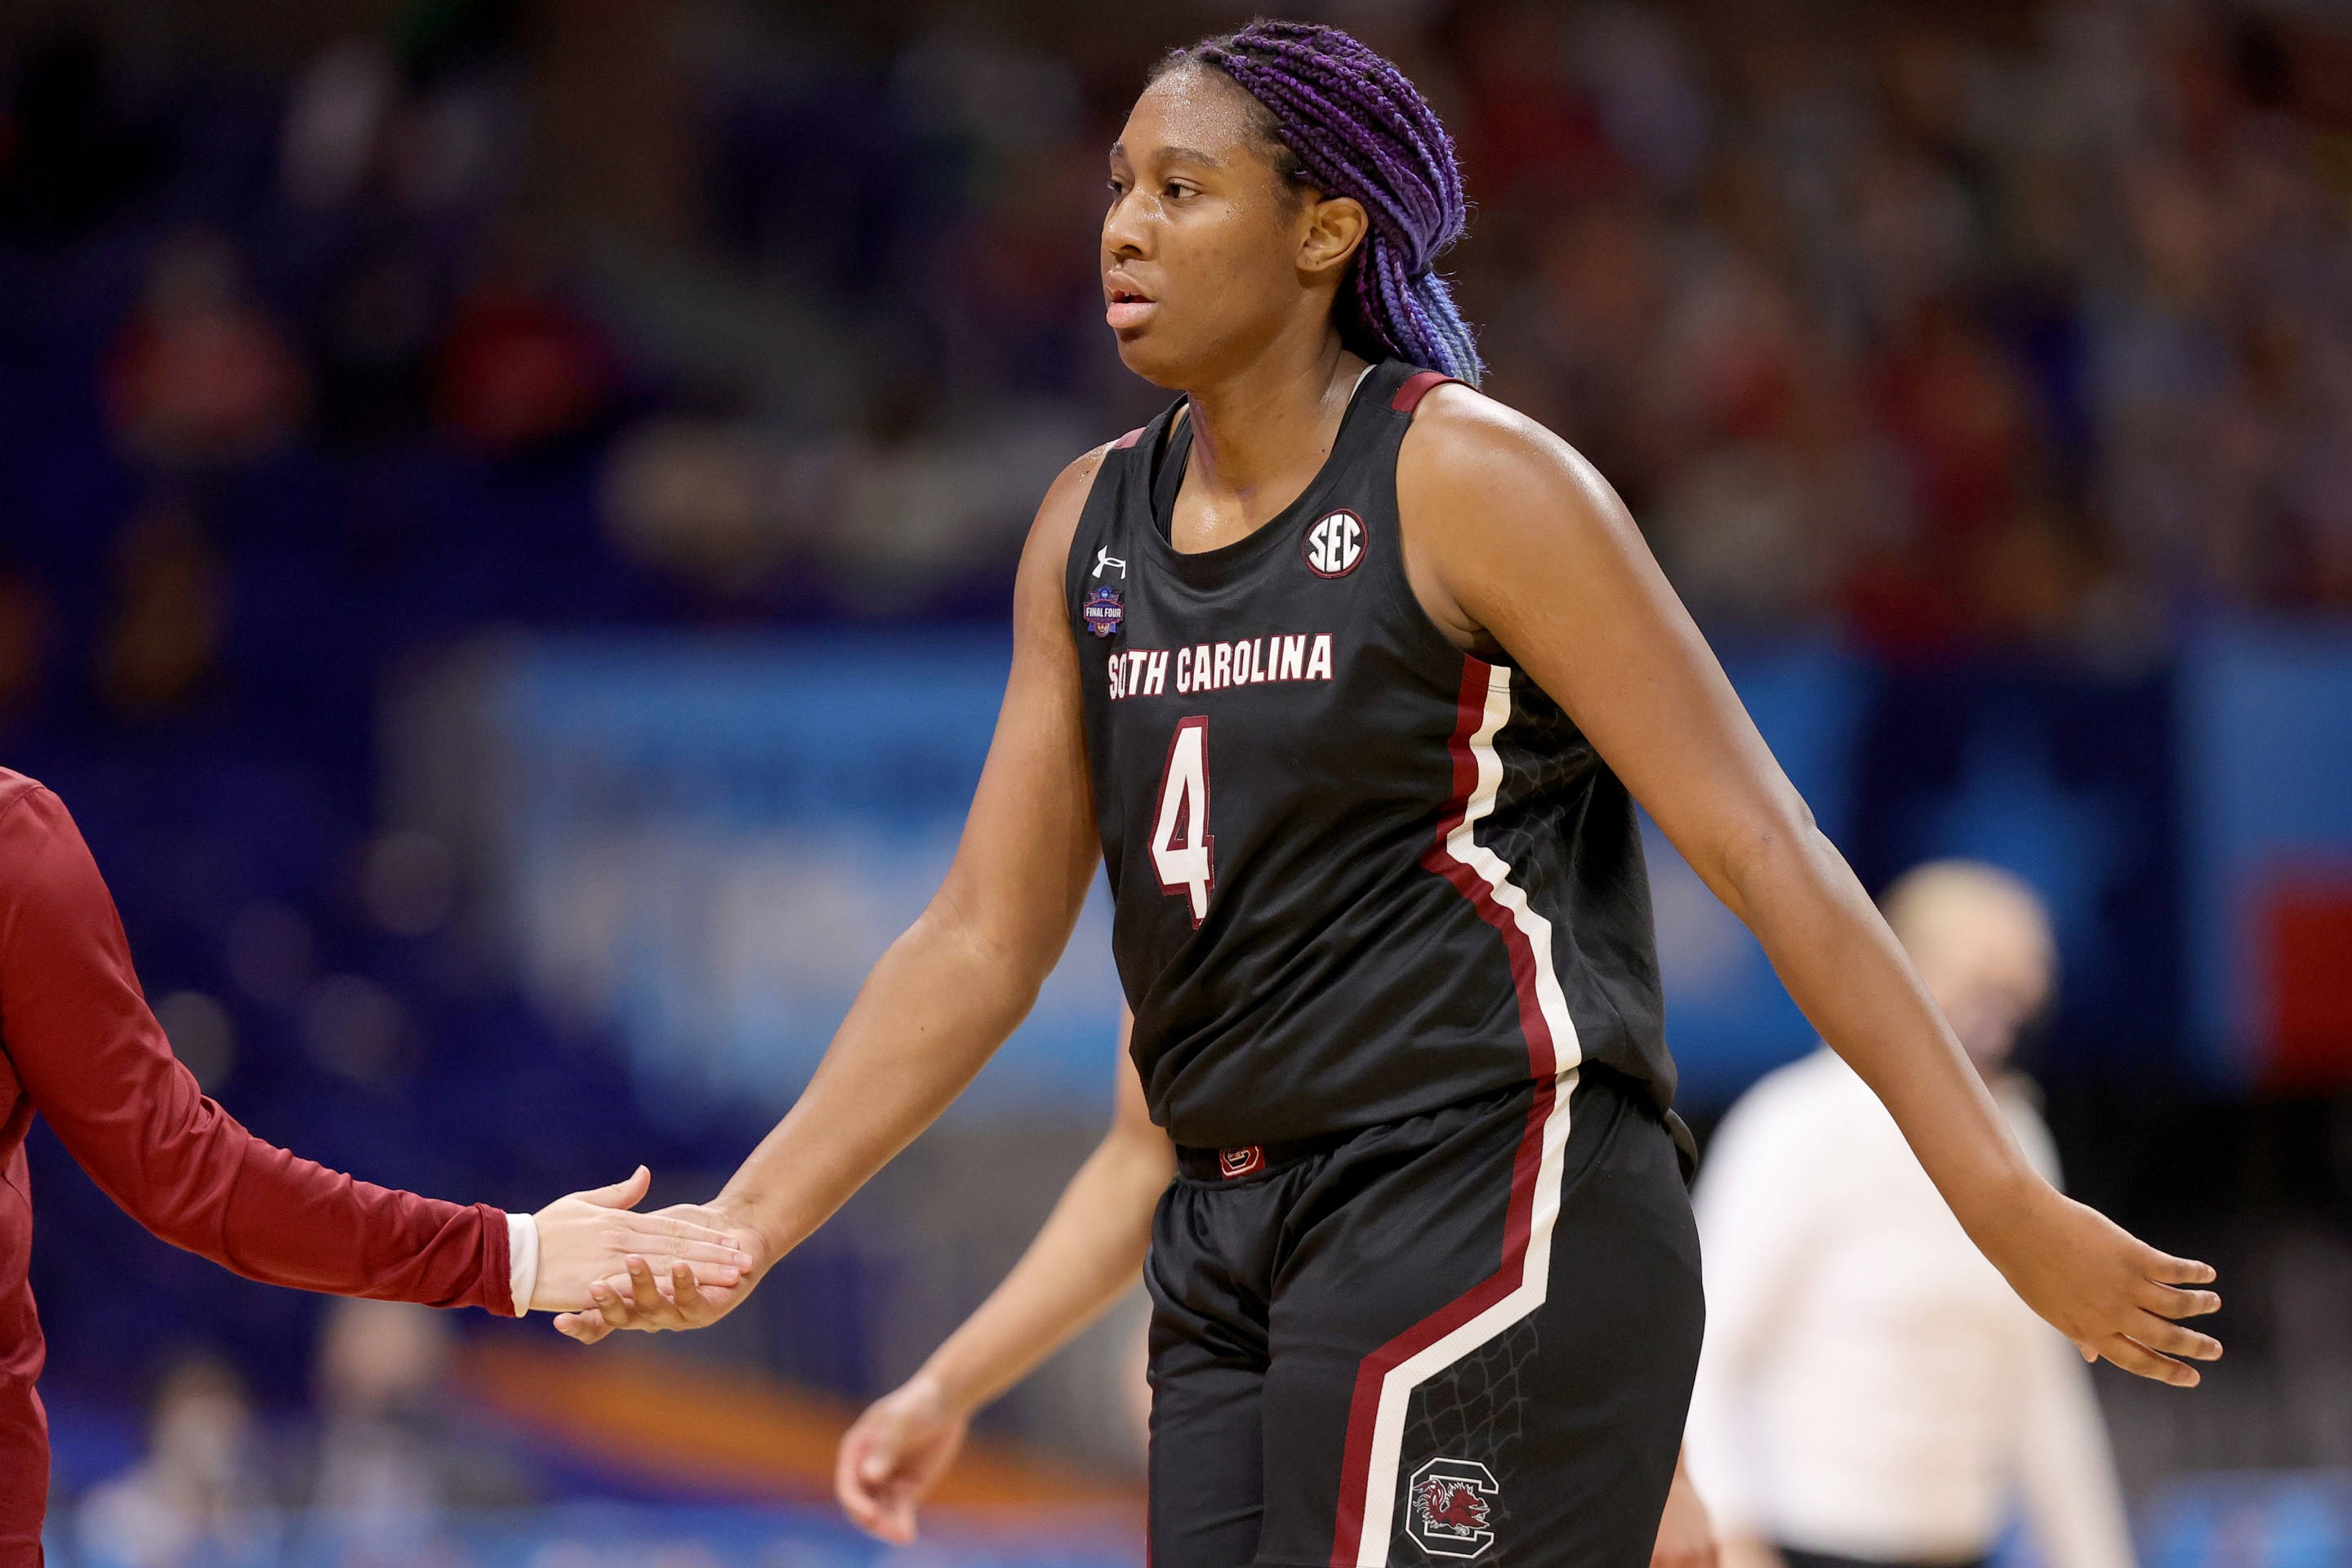 SAN ANTONIO, TEXAS - APRIL 02: Aliyah Boston #4 of the South Carolina Gamecocks celebrates with teammates against the Stanford Cardinal during the second quarter in the Final Four semifinal game of the 2021 NCAA Women's Basketball Tournament at the Alamodome on April 02, 2021 in San Antonio, Texas.